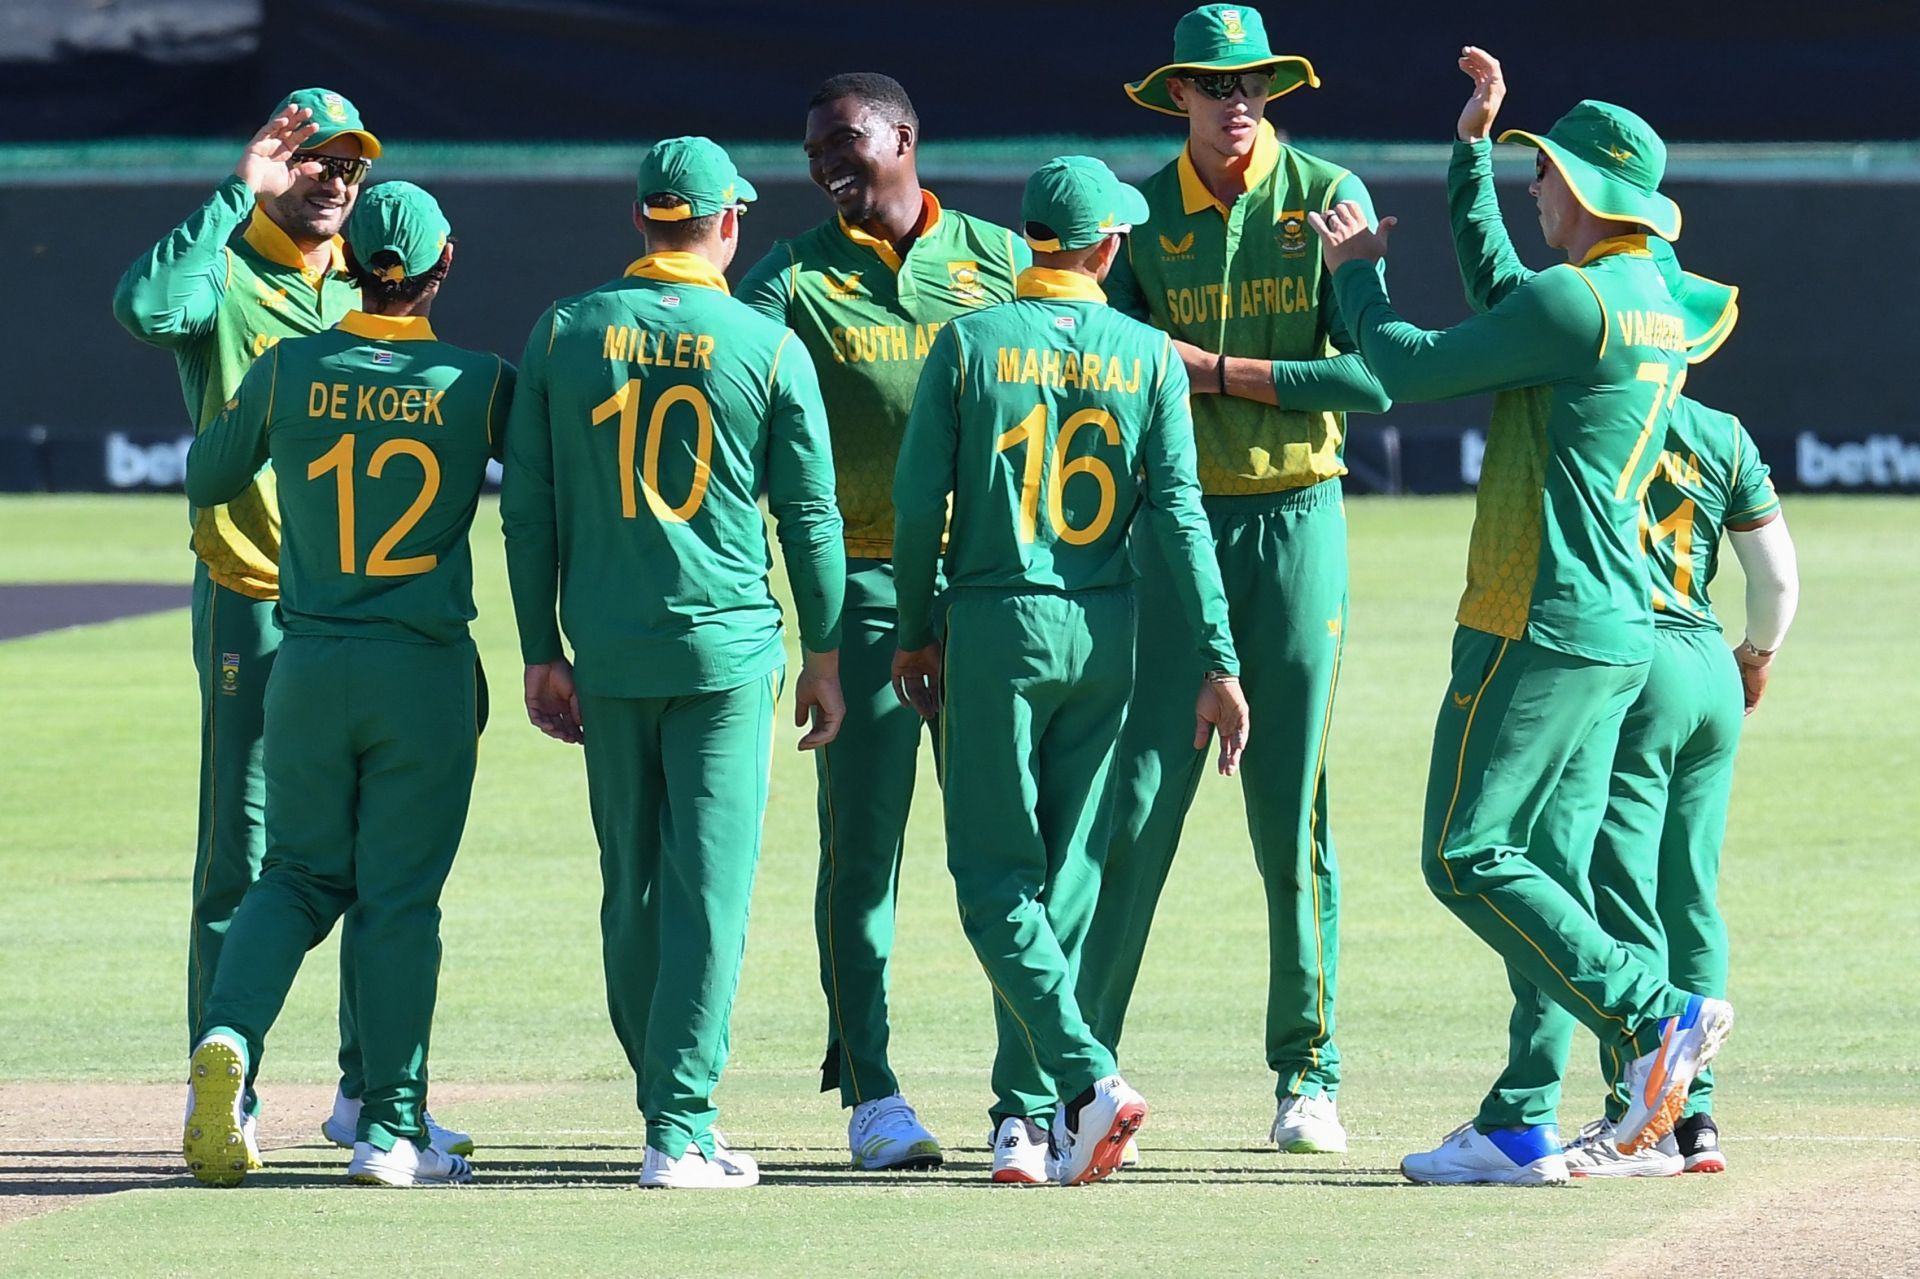 South Africa team celebrating after taking a wicket in the first ODI